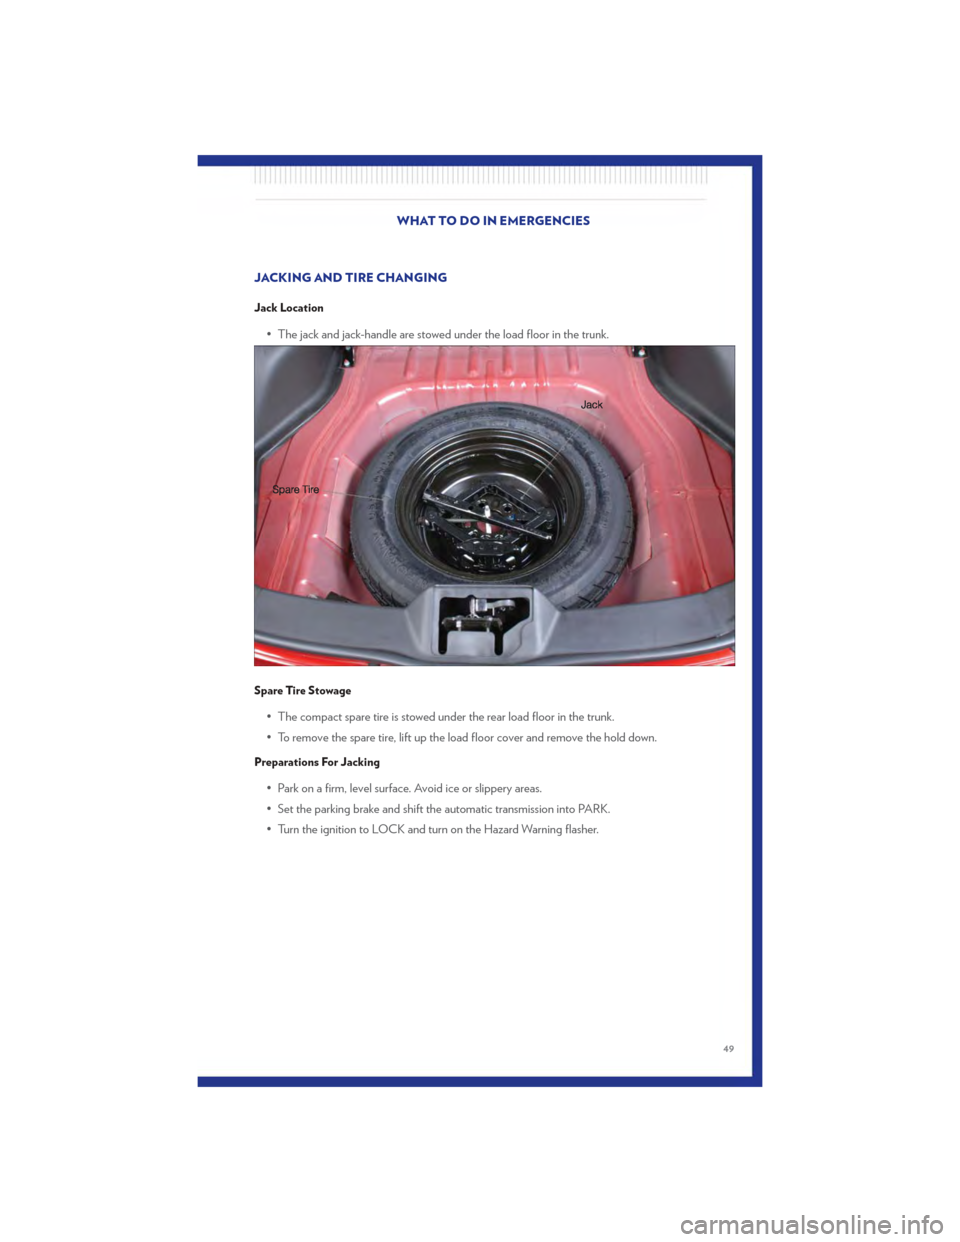 CHRYSLER 200 2011 1.G User Guide JACKING AND TIRE CHANGING
Jack Location
• The jack and jack-handle are stowed under the load floor in the trunk.
Spare Tire Stowage
• The compact spare tire is stowed under the rear load floor in 